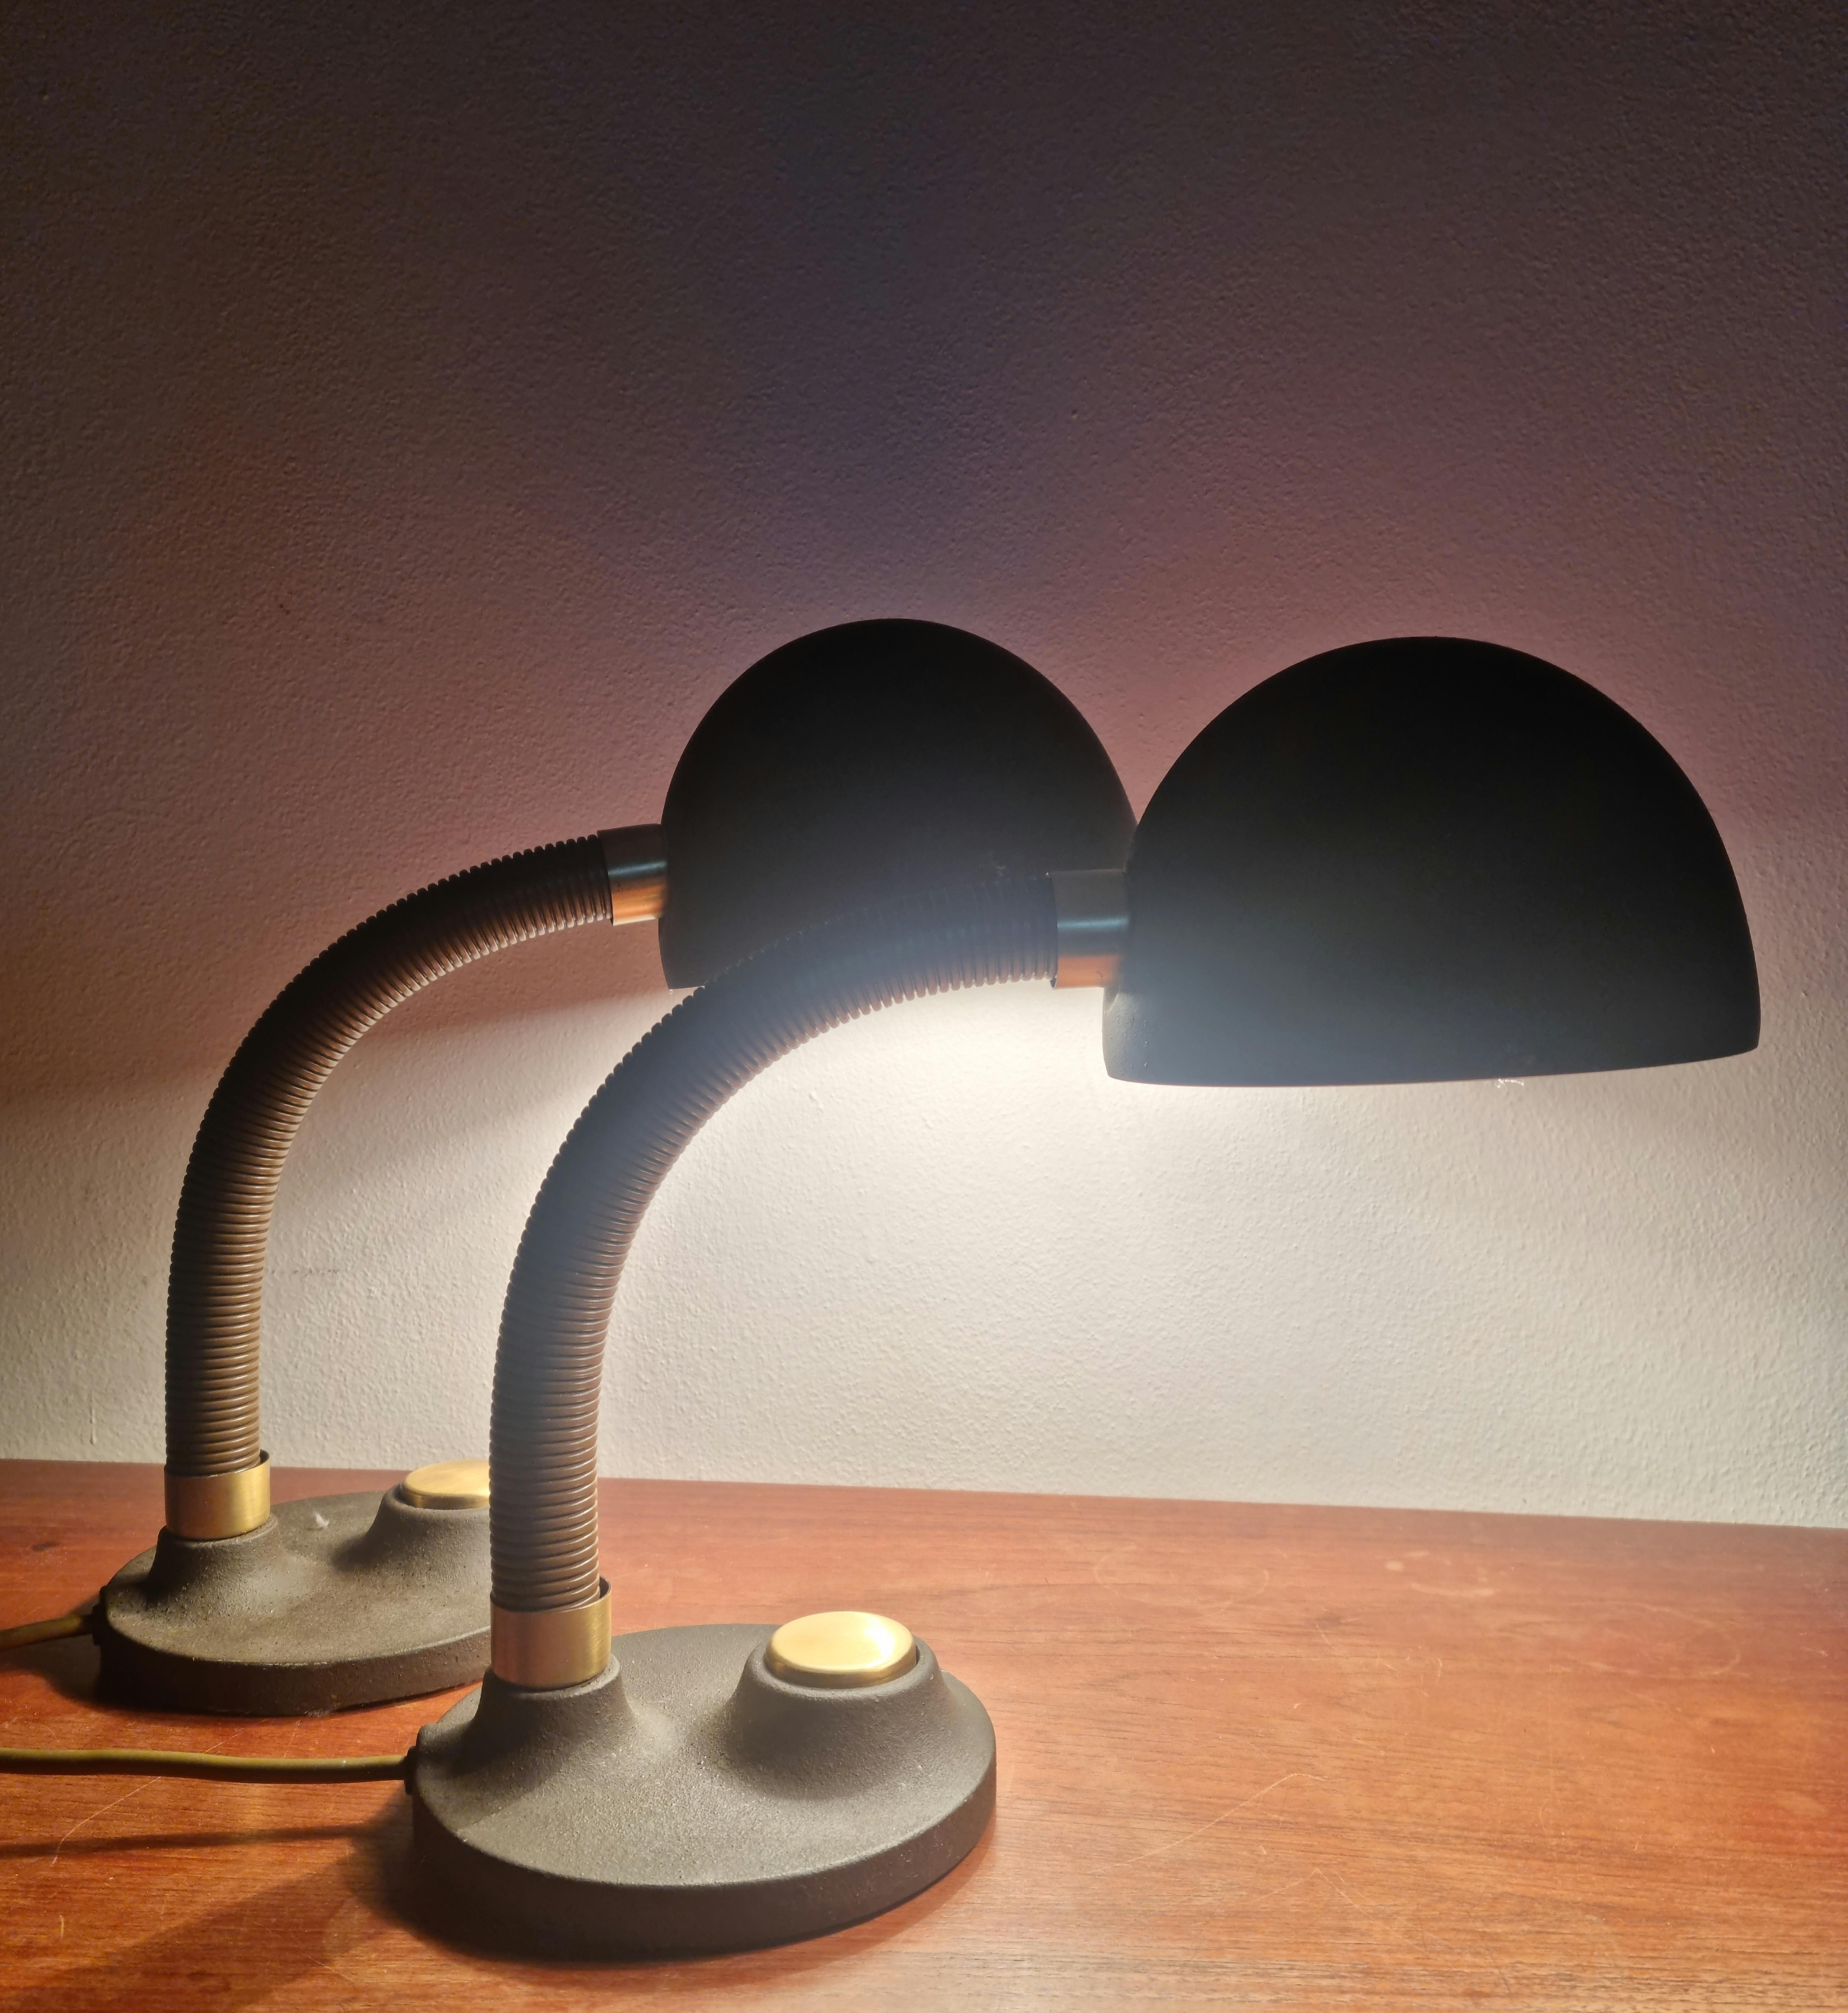 Pair of Midcentury Table Lamps Hillebrand, Germany, 1970s For Sale 3